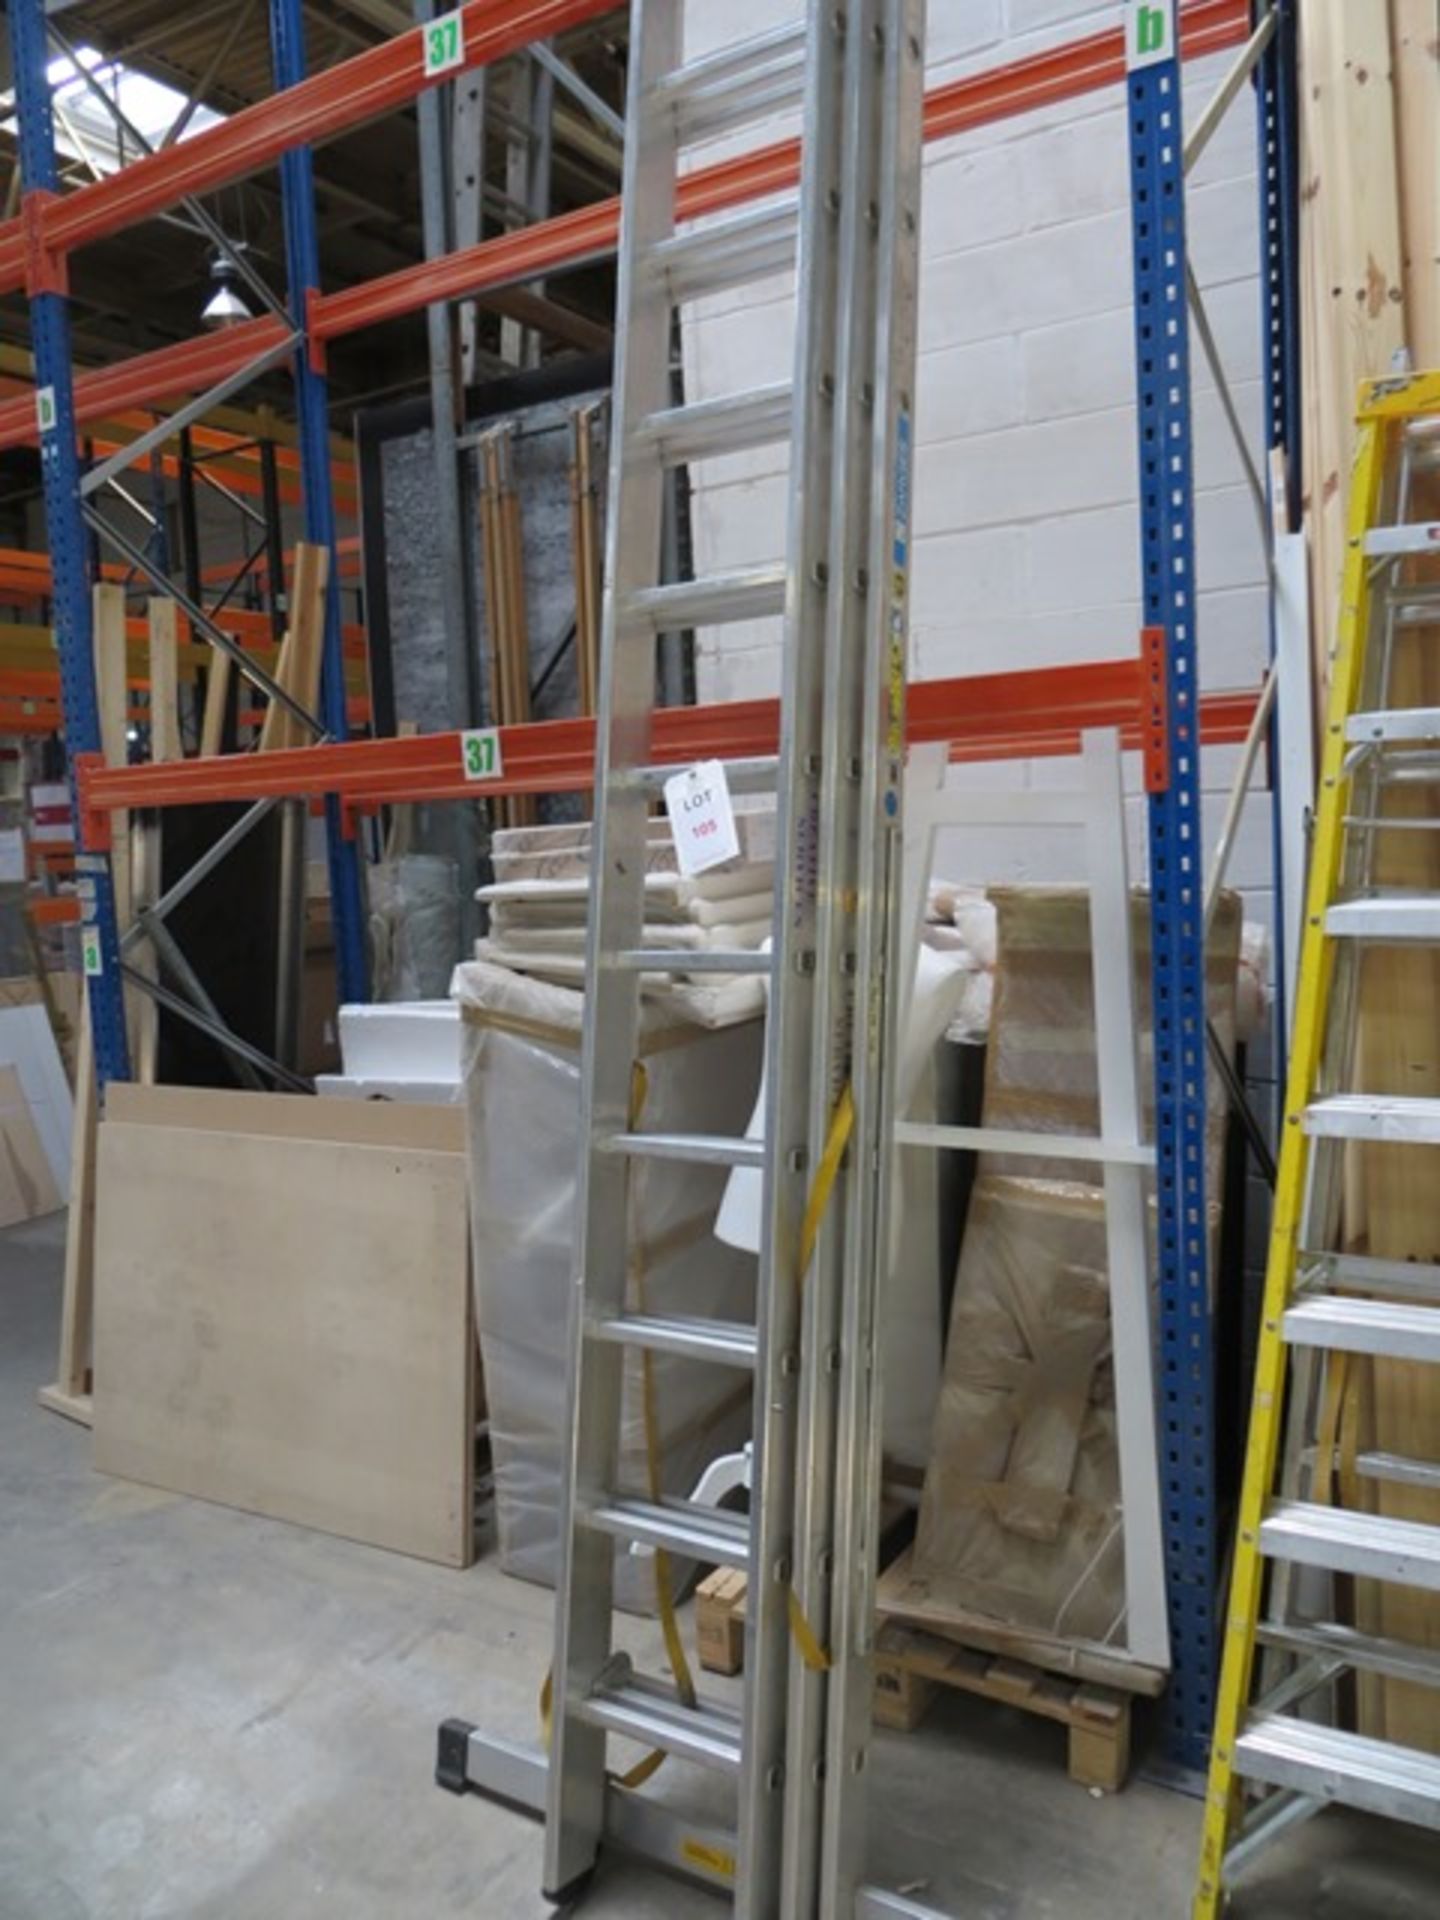 Set of Aluminium Triple Extending Ladders, 12 rungs on each ladder and all three ladders are